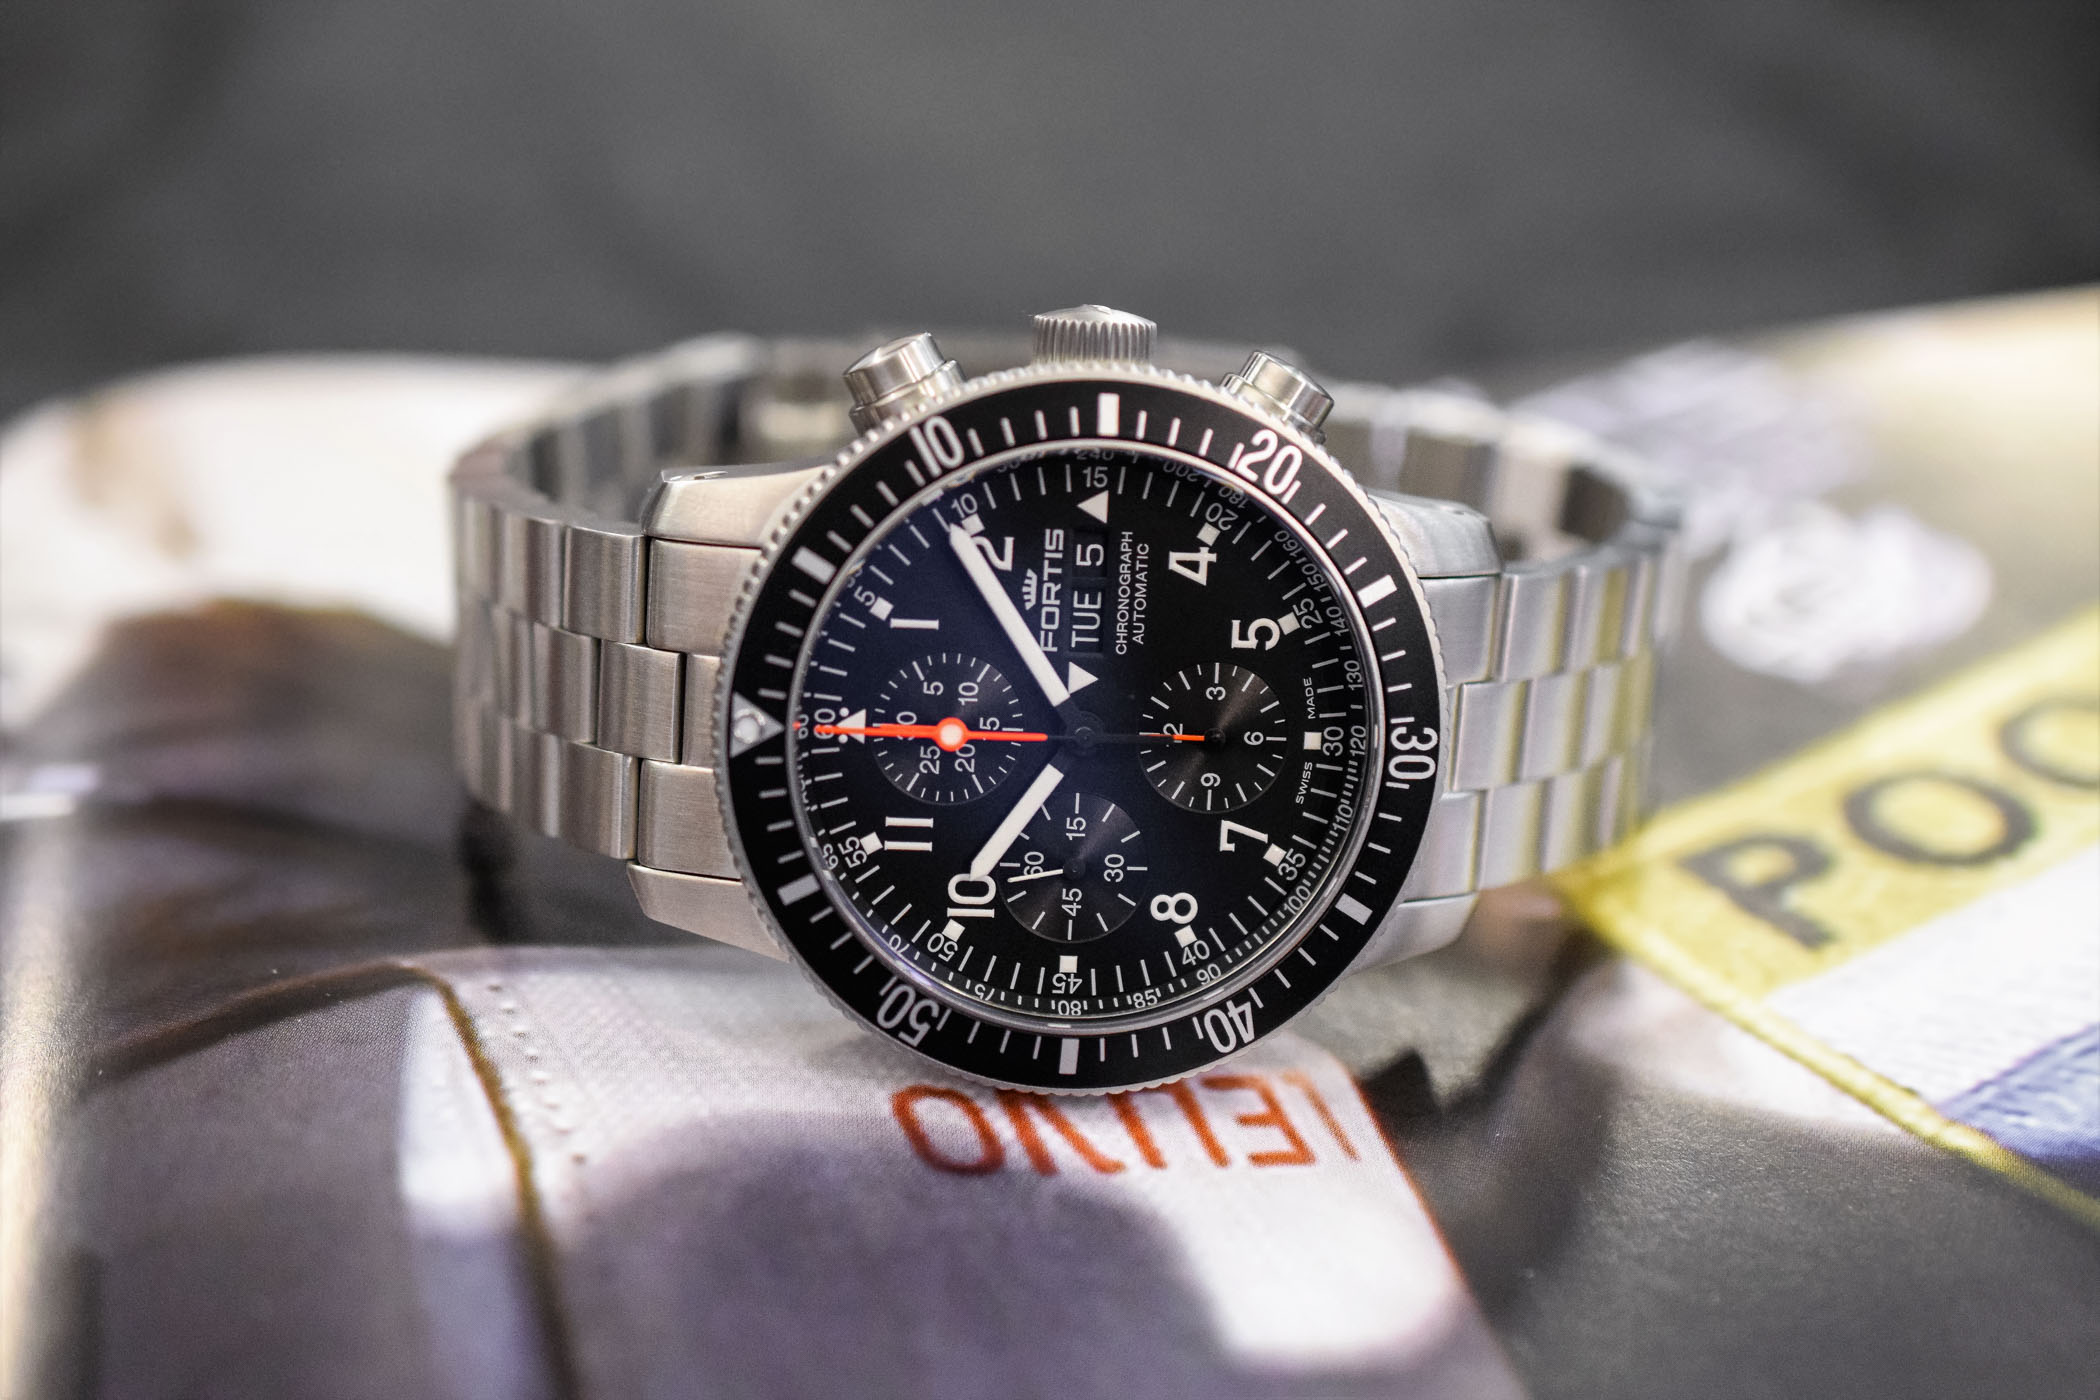 Fortis B-42 Official Cosmonauts Chronograph